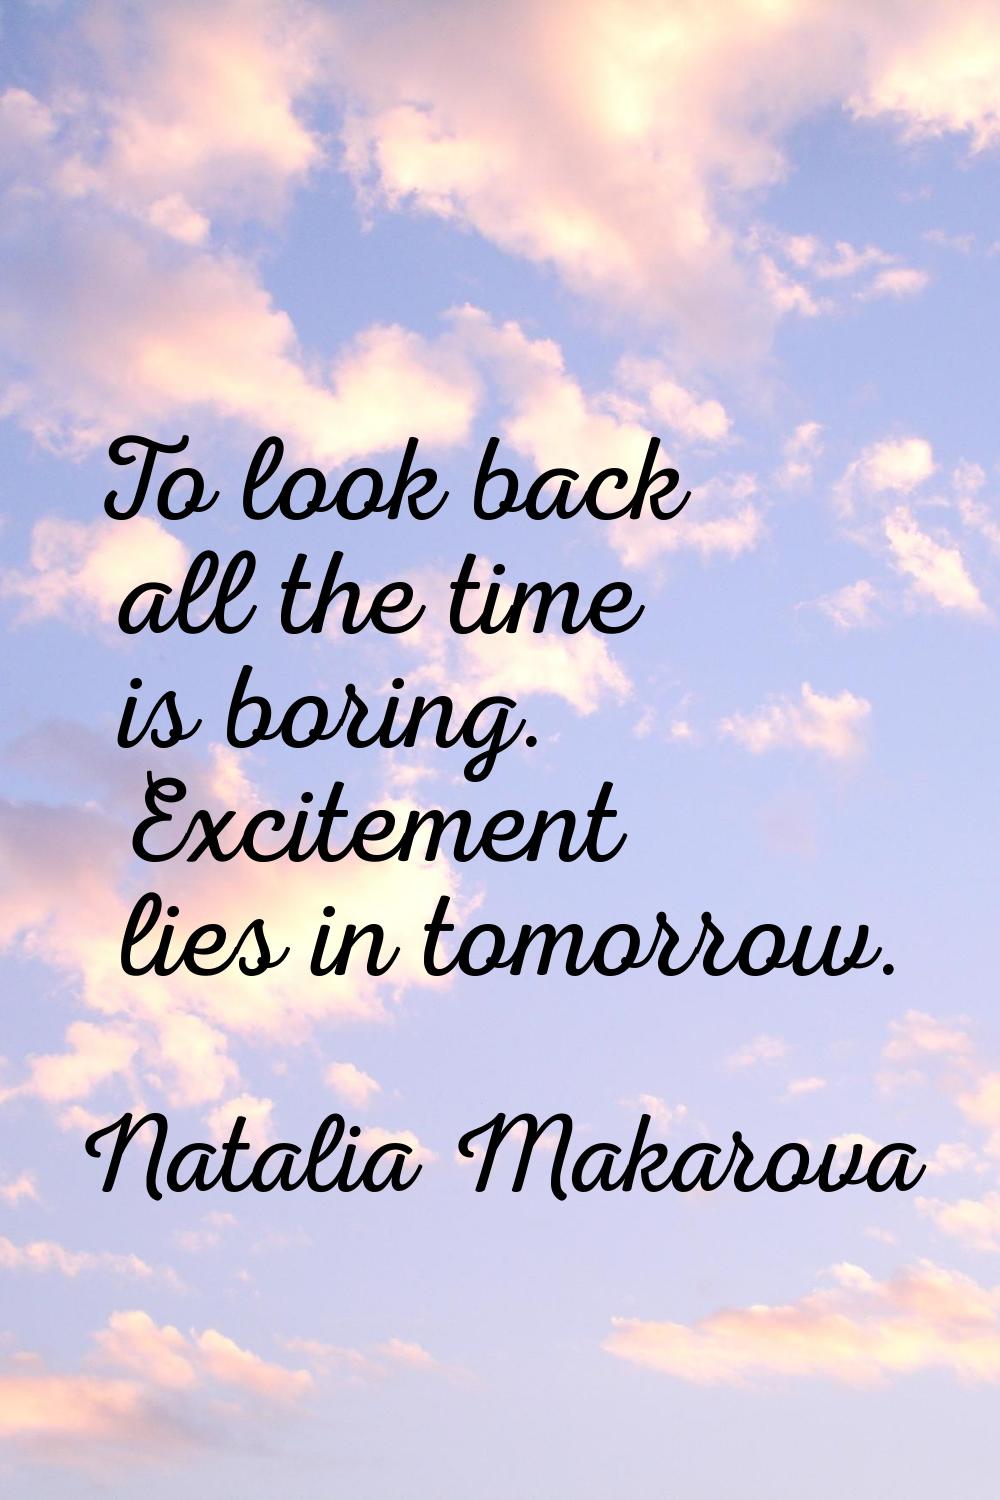 To look back all the time is boring. Excitement lies in tomorrow.